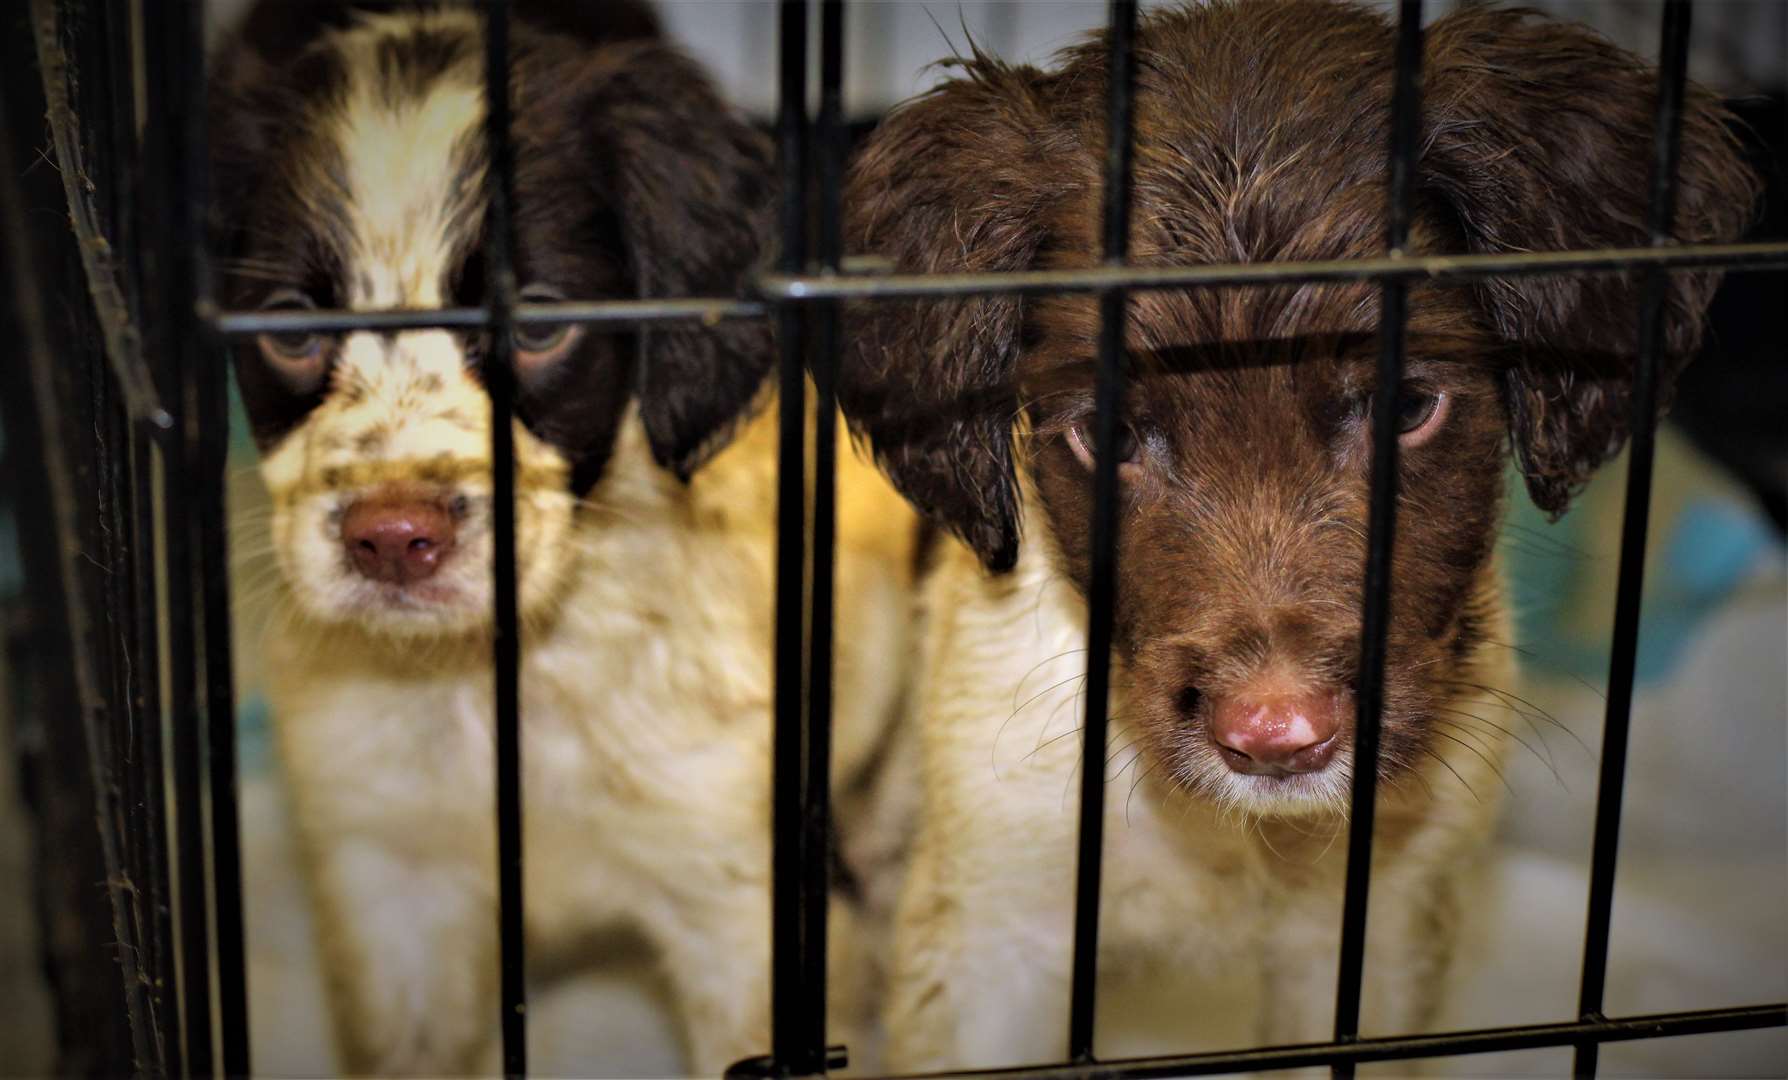 Dogs rescued at Cairnryan Port in August (USPCA/PA)